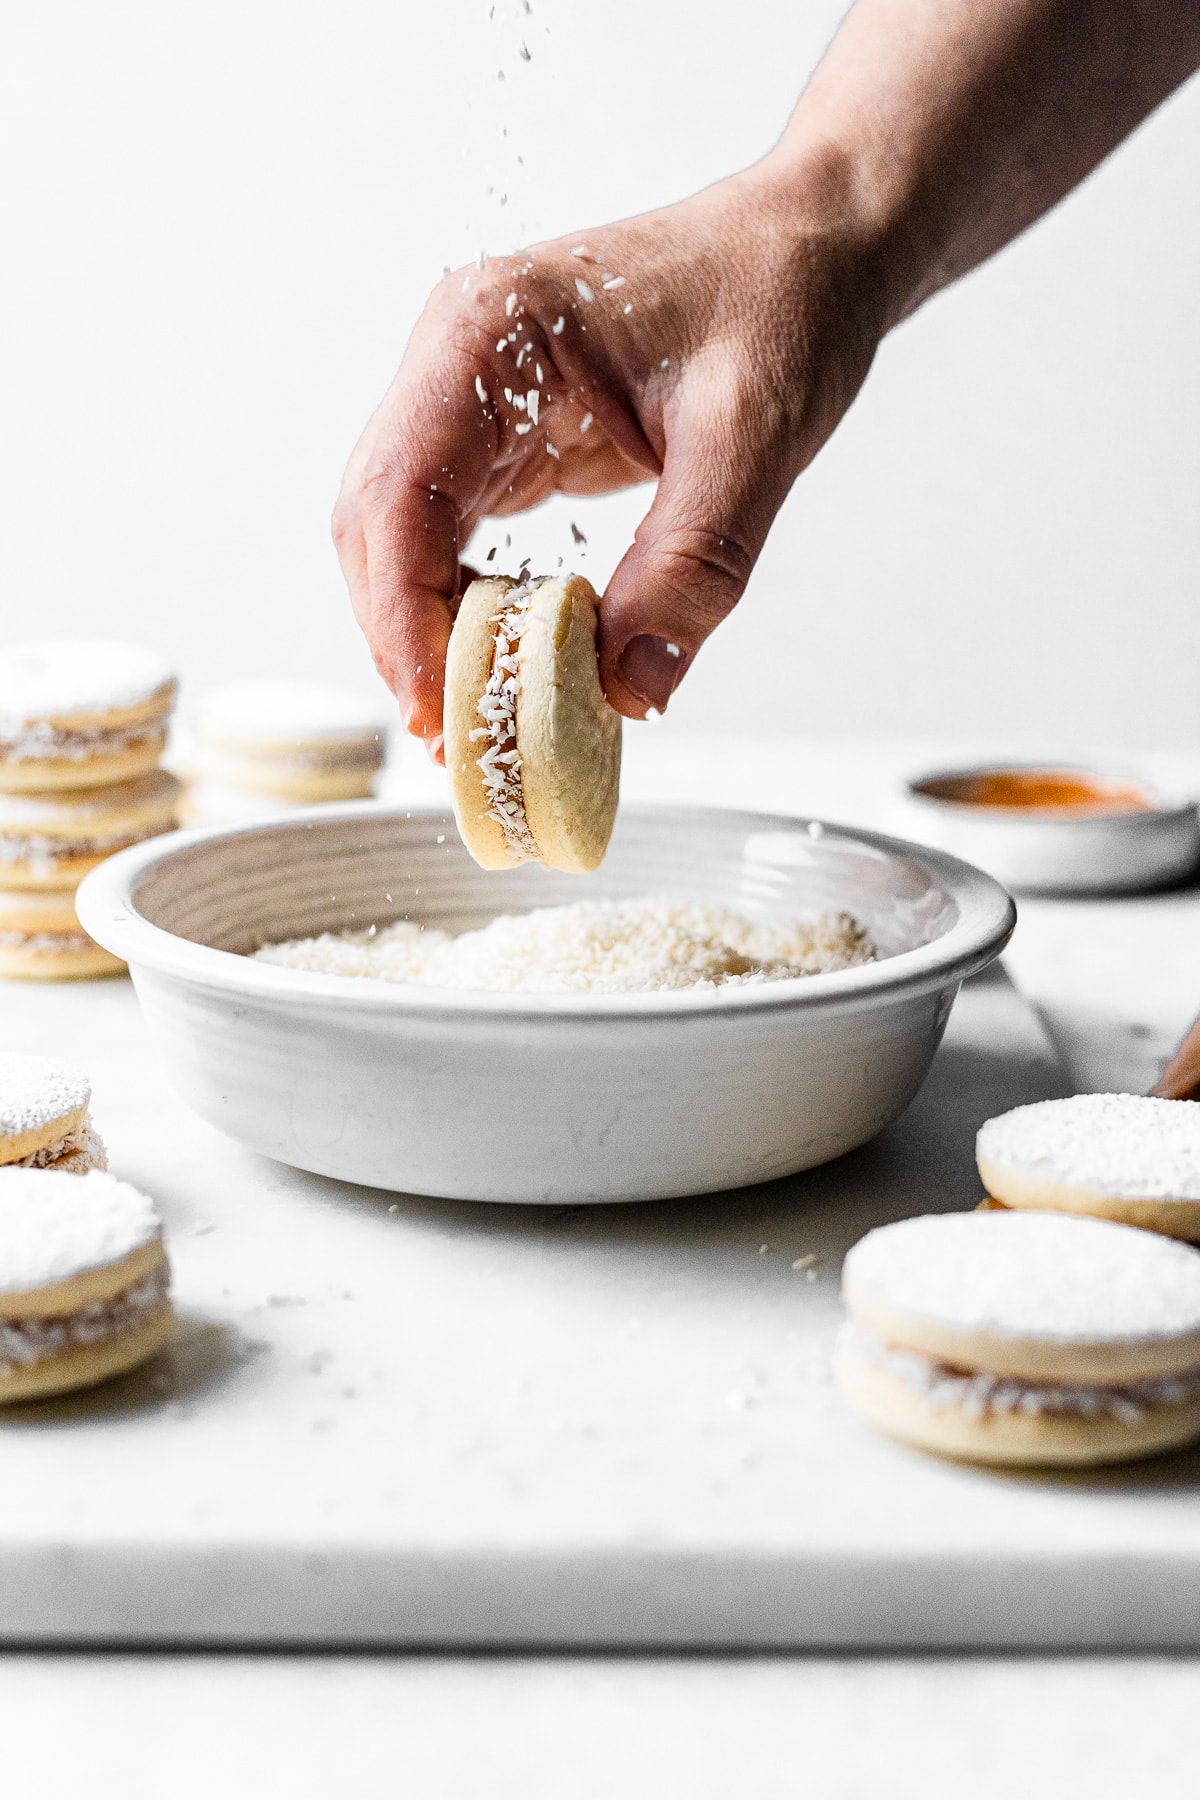 A light and airy image of a hand holding an alfajor cookie over a bowl of shredded coconut. More cookies are nearby. There is a sprinkling of shredded coconut being dropped from above.